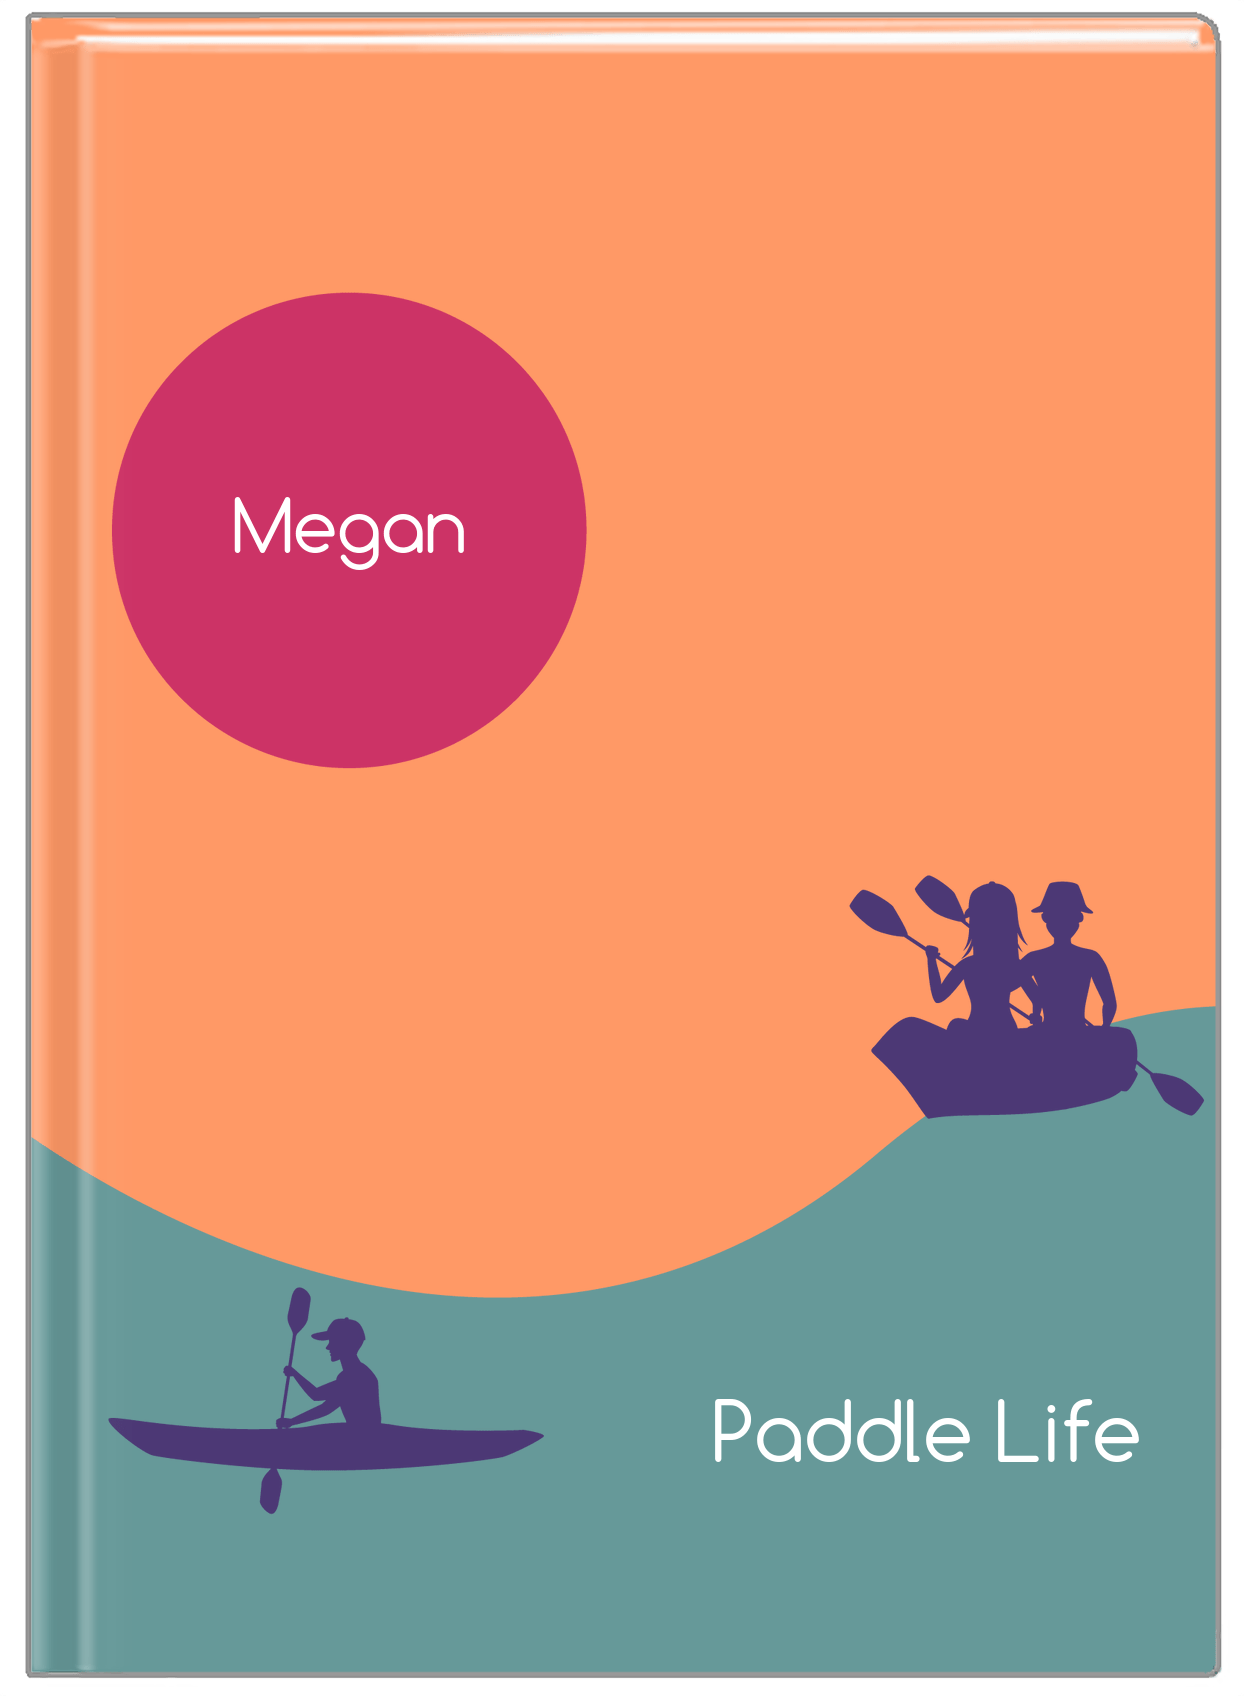 Personalized Beach Journal XII - Paddle Life - Orange Background - Front View